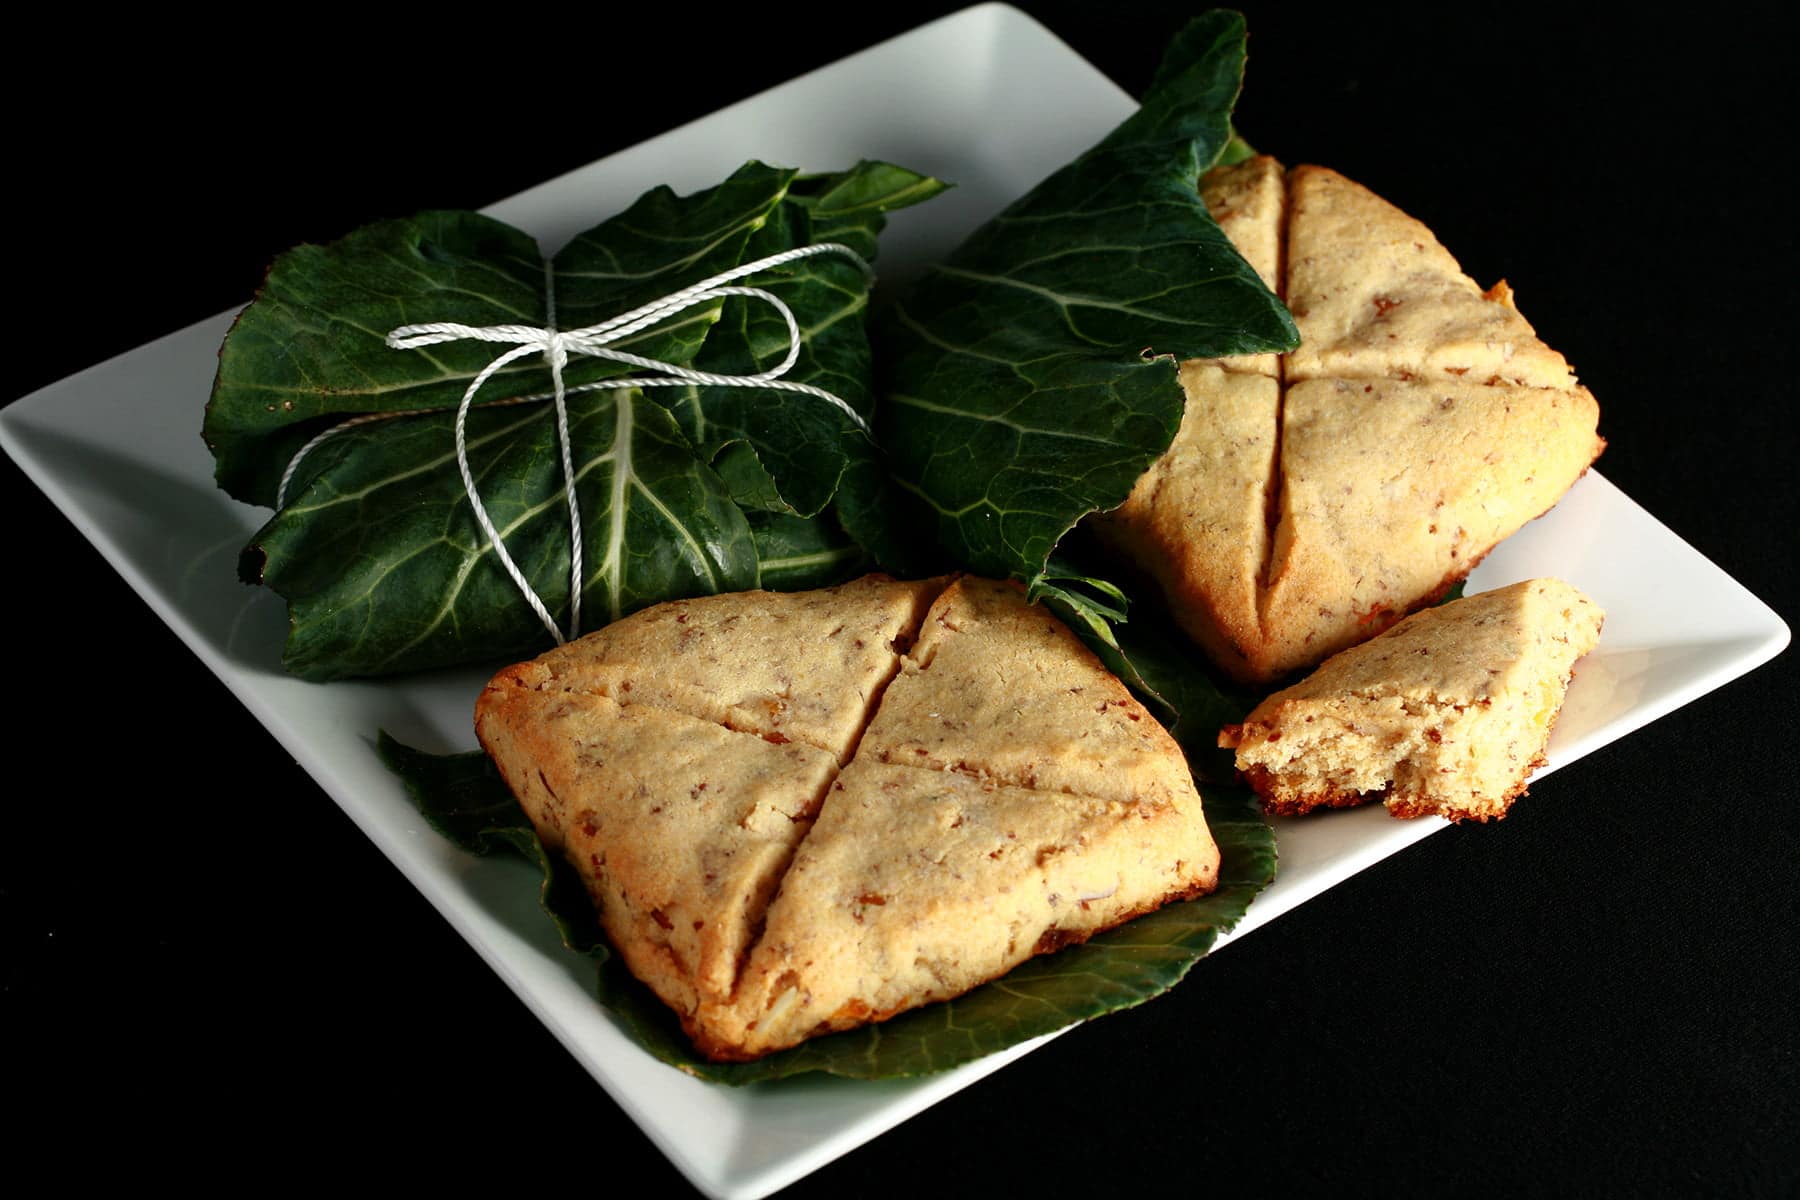 A square white plate displays 3 pieces of Lembas bread. Two of the square biscuits - each marked with an X cut - are unwrapped, while the 3 is still neatly packaged in a large leaf, and tied with twine.